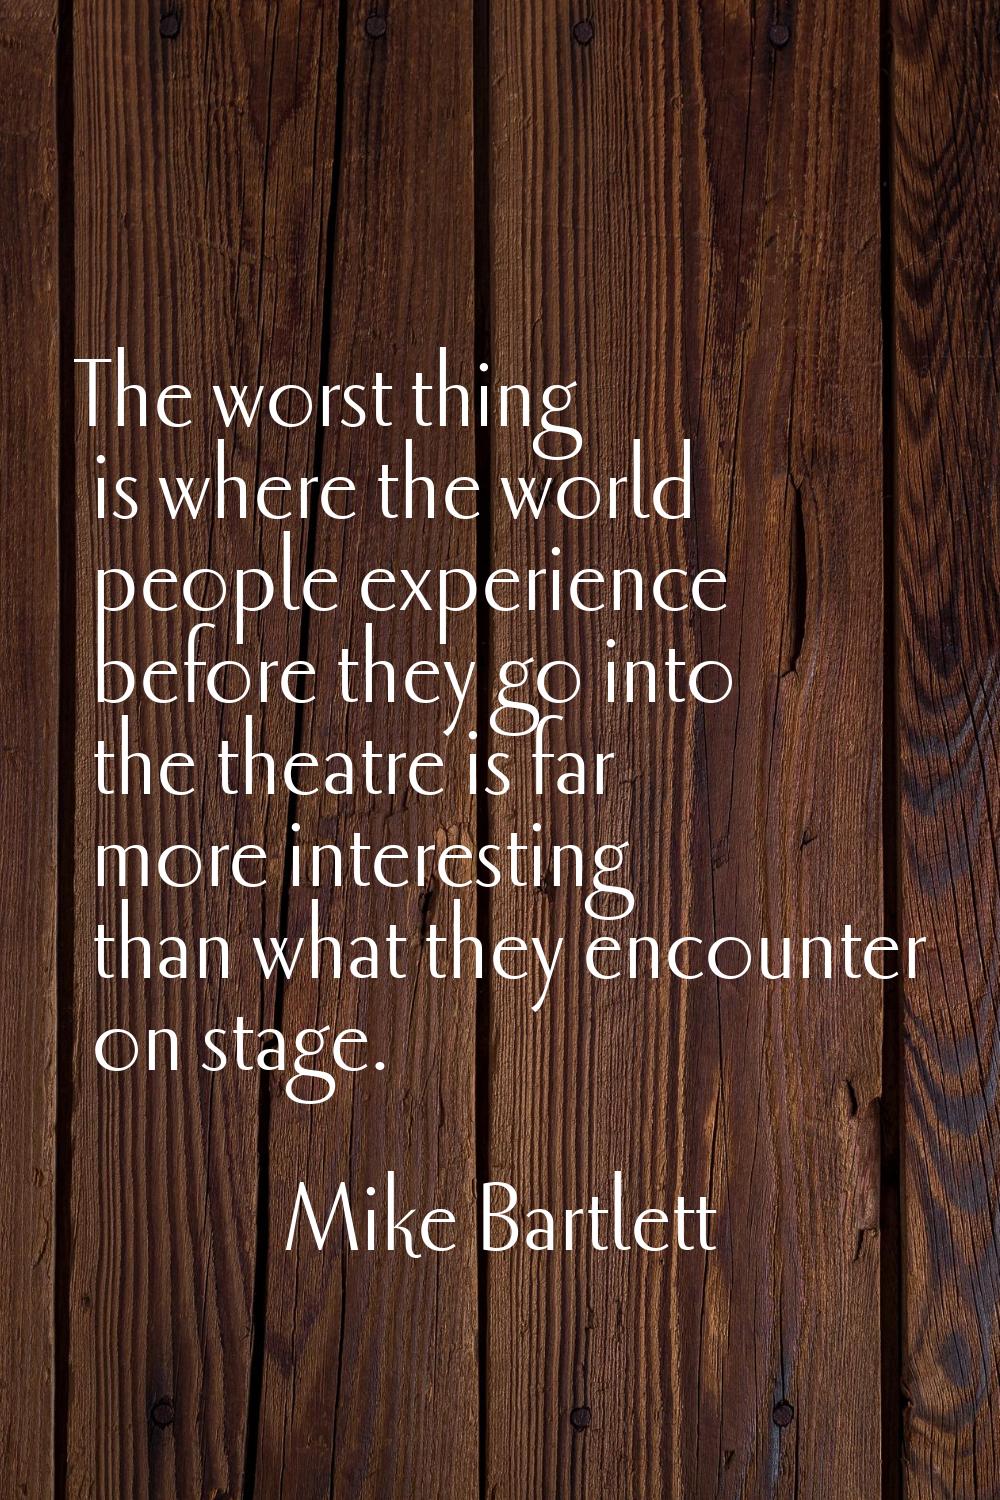 The worst thing is where the world people experience before they go into the theatre is far more in